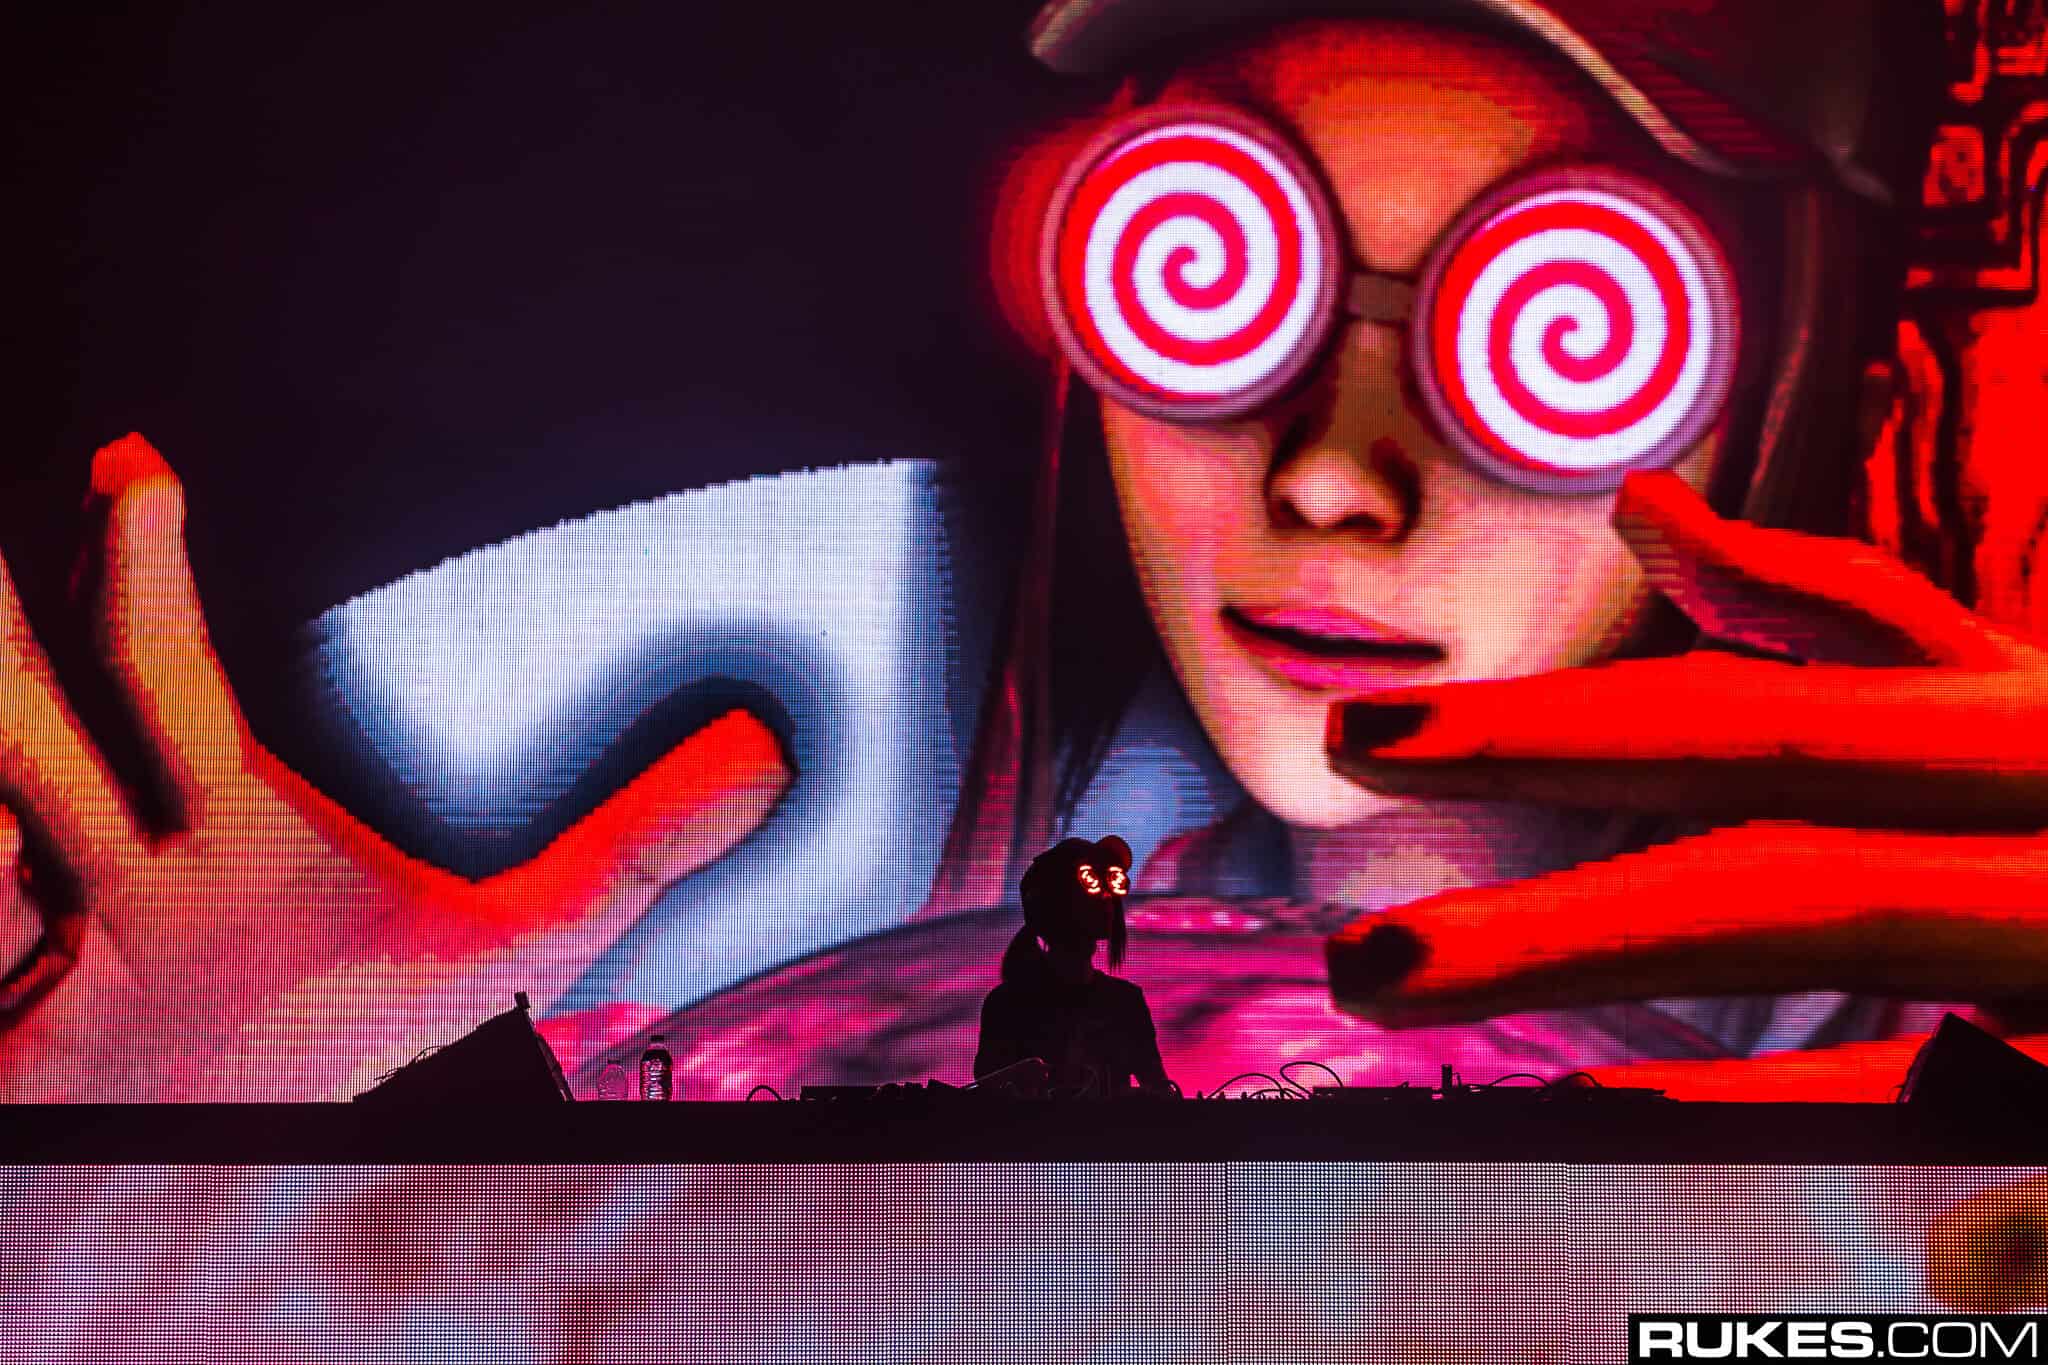 REZZ reveals her album is done and teases new tour production